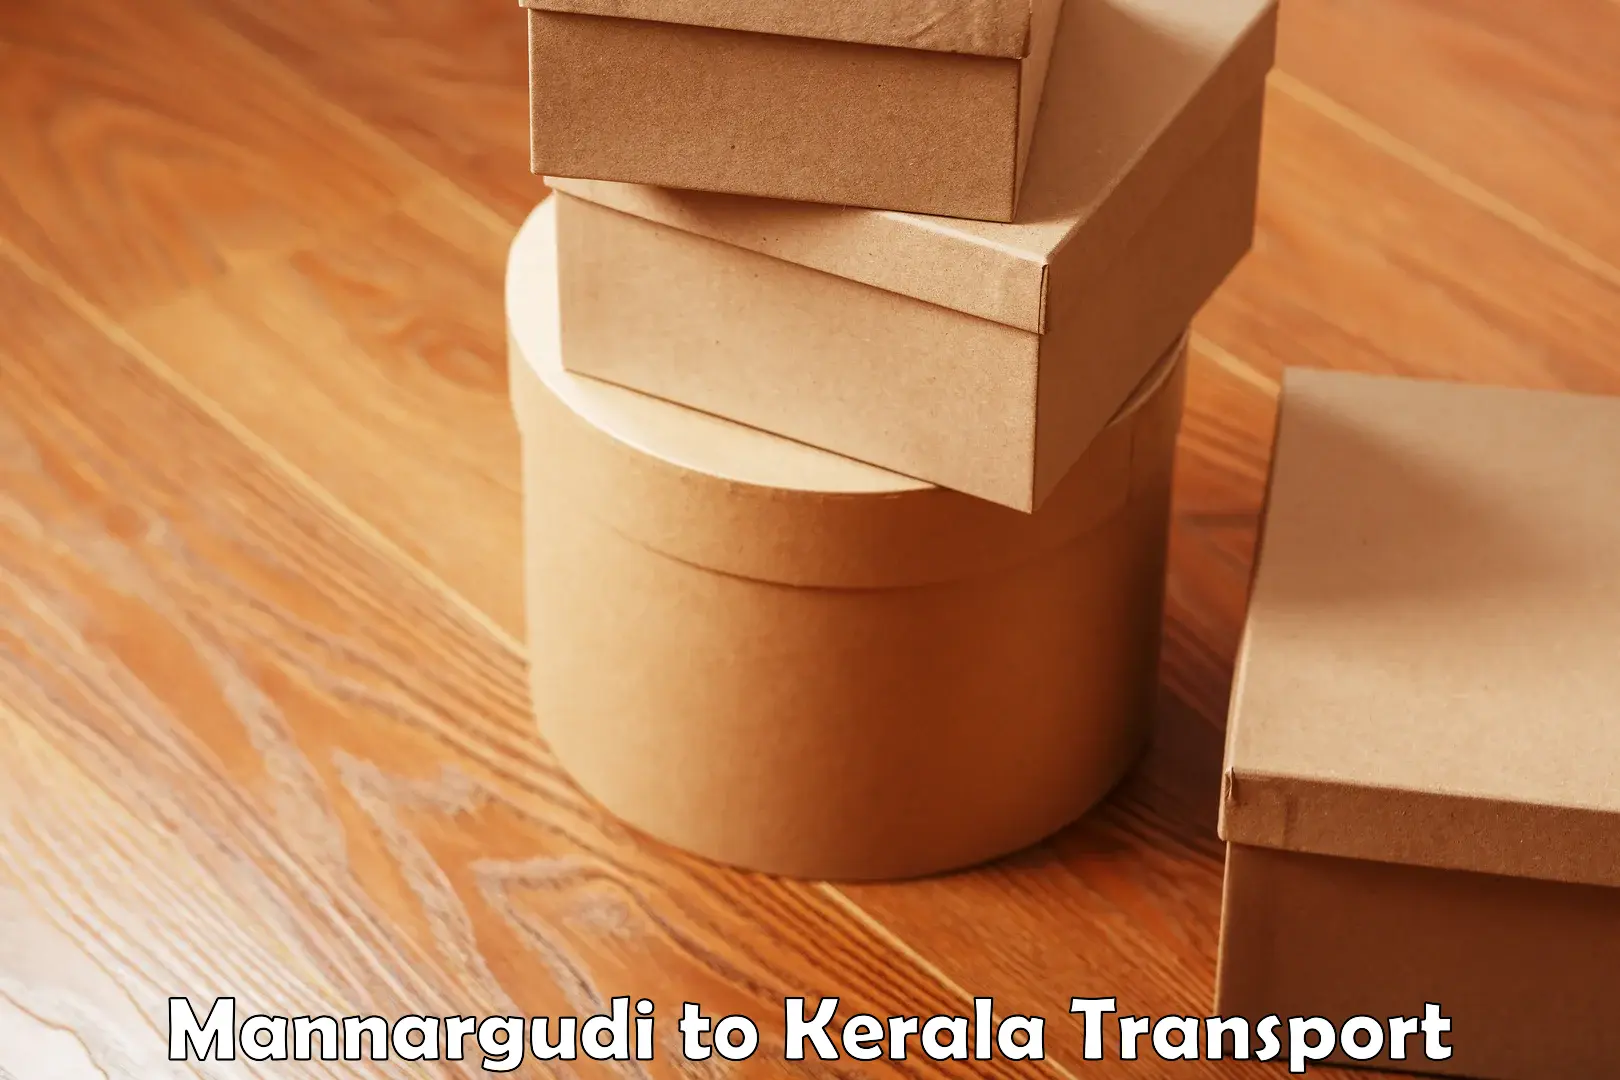 Transport bike from one state to another Mannargudi to Karunagappally